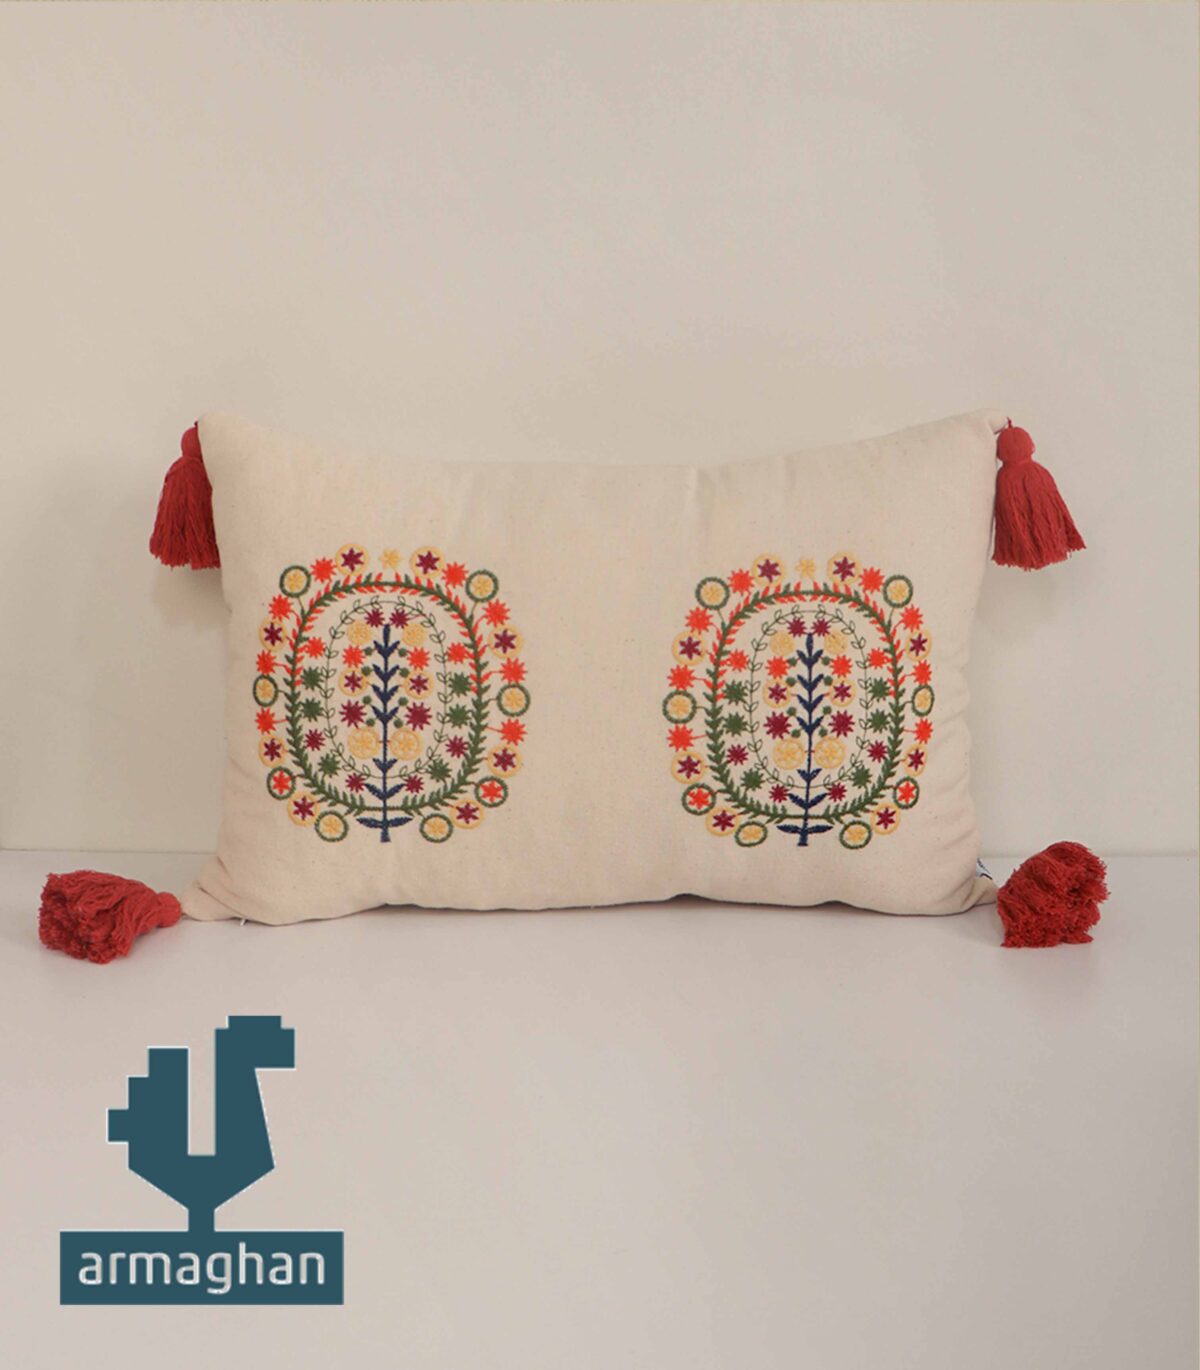 The price of the embroidered rectangular cushion